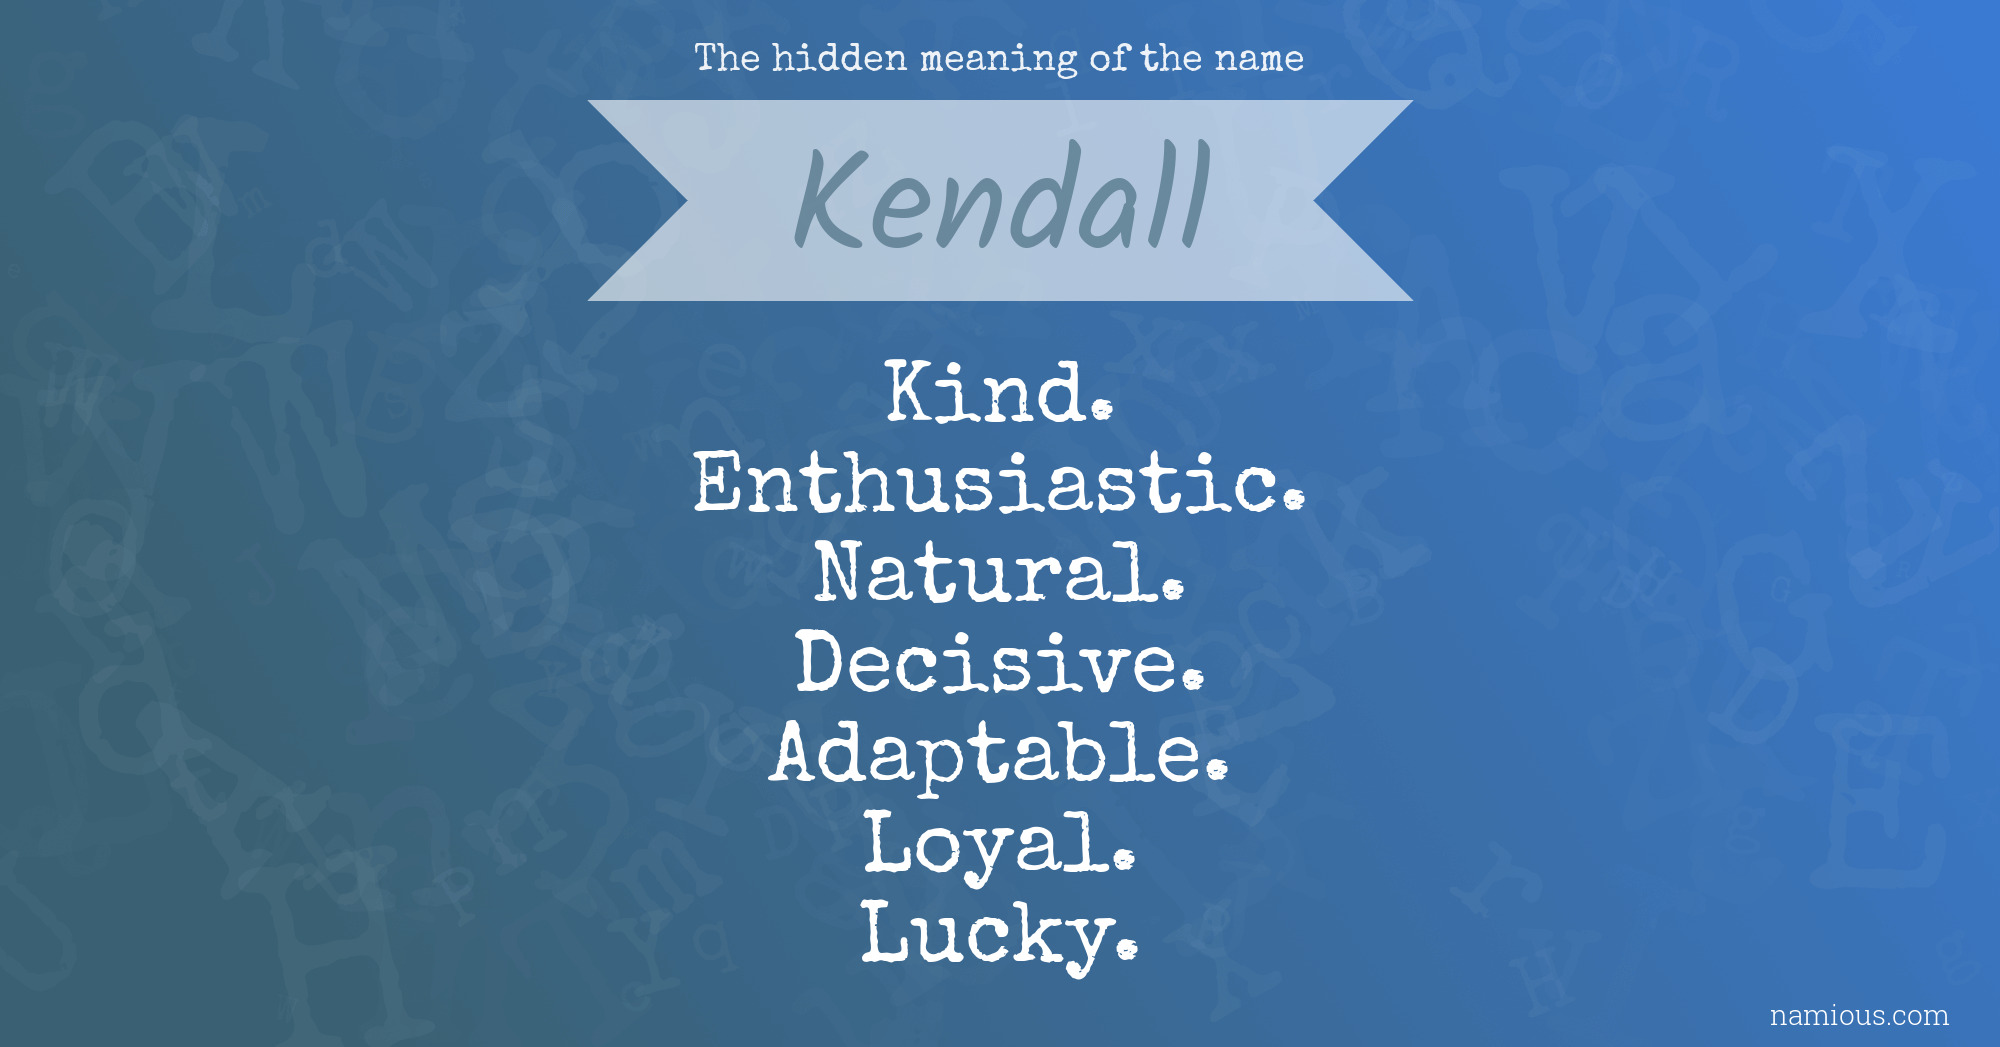 The hidden meaning of the name Kendall